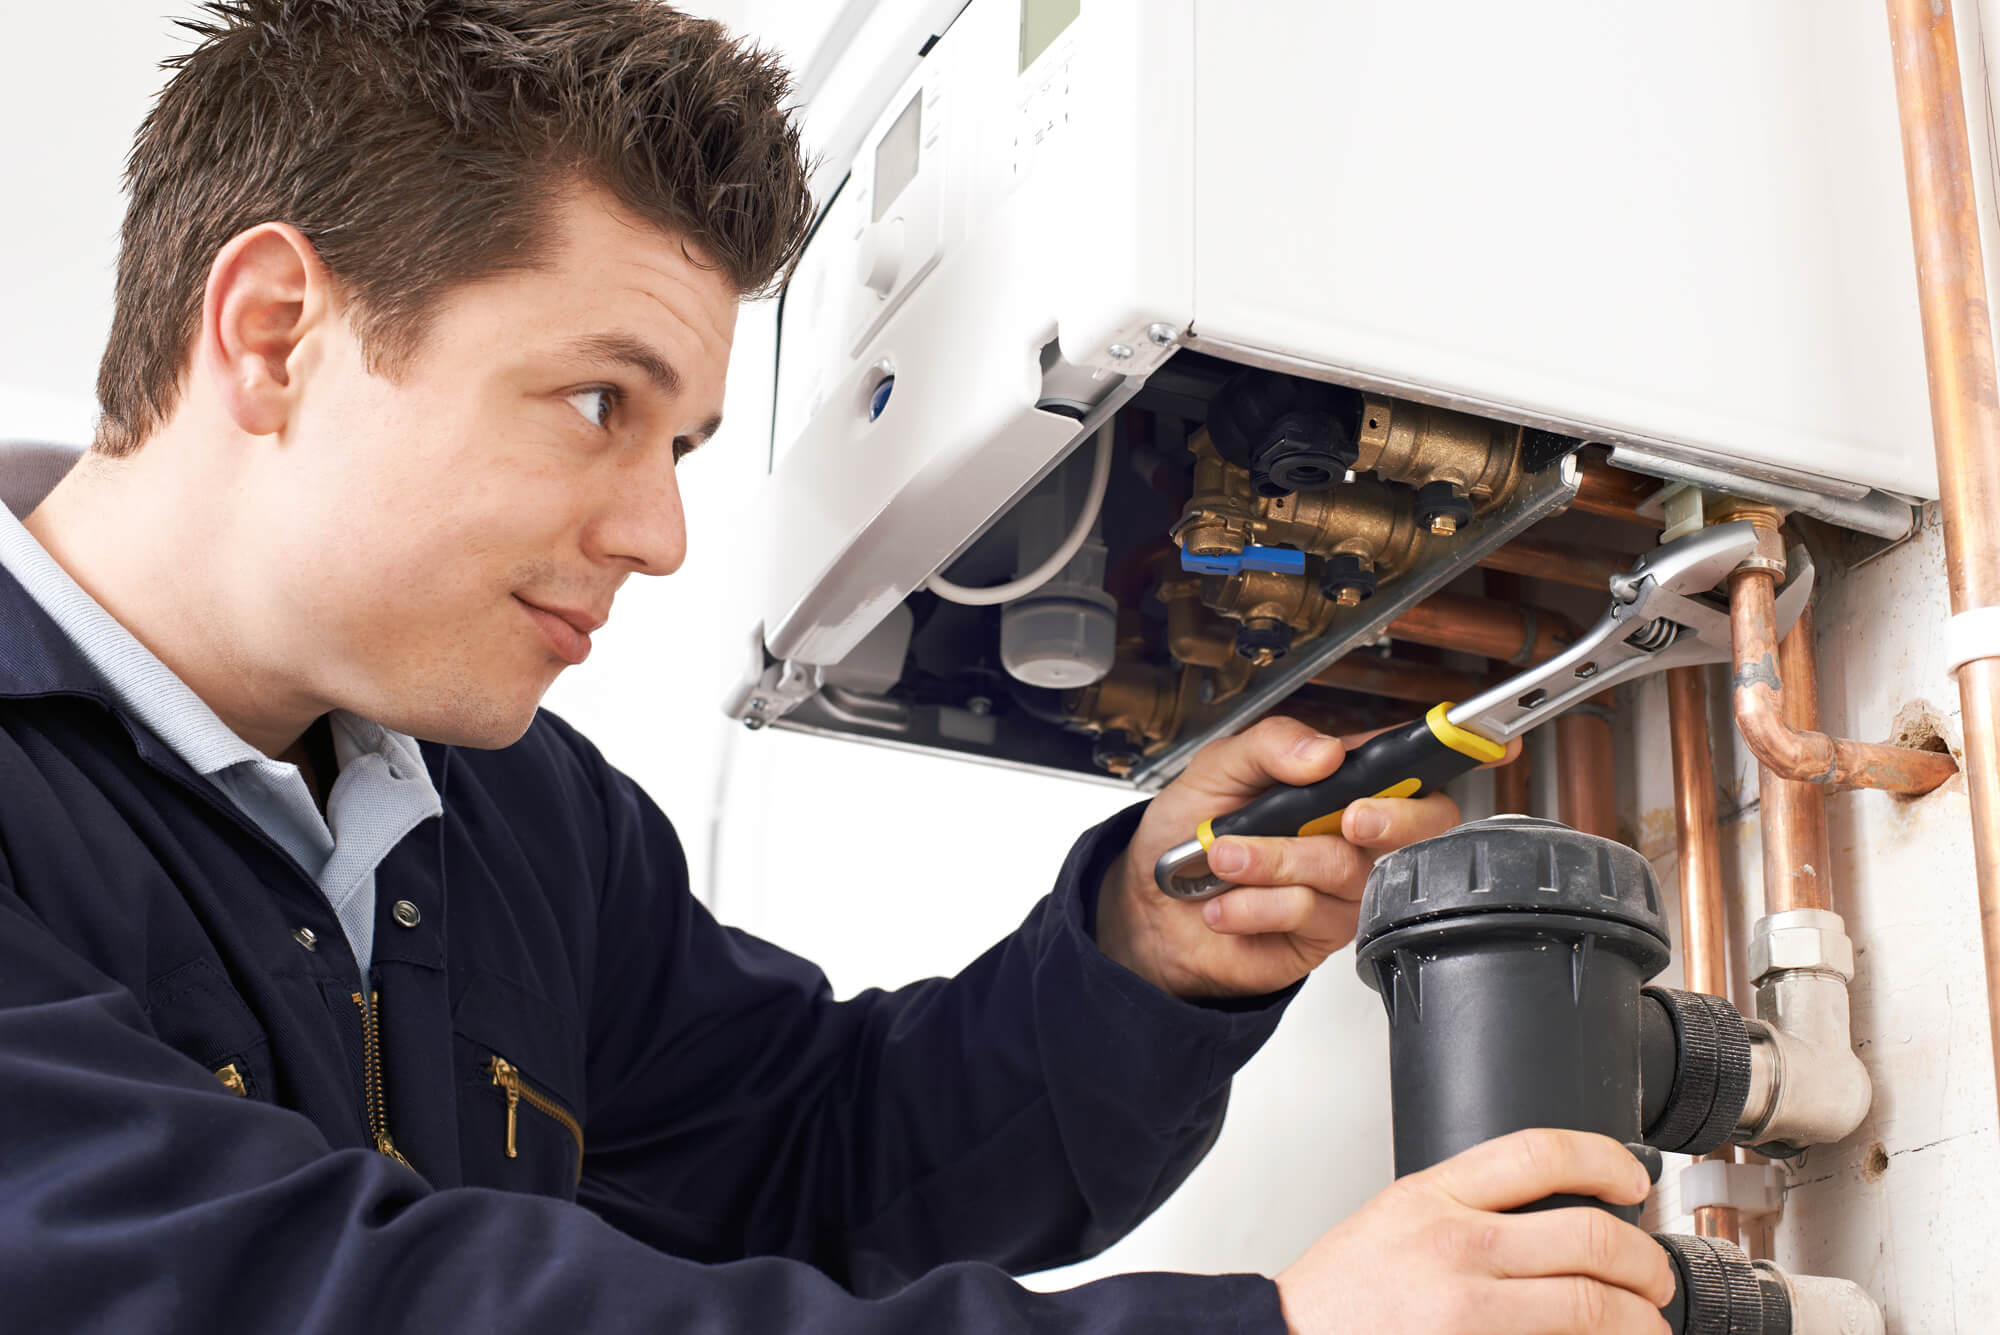 Engineer working on replacing a gas boiler